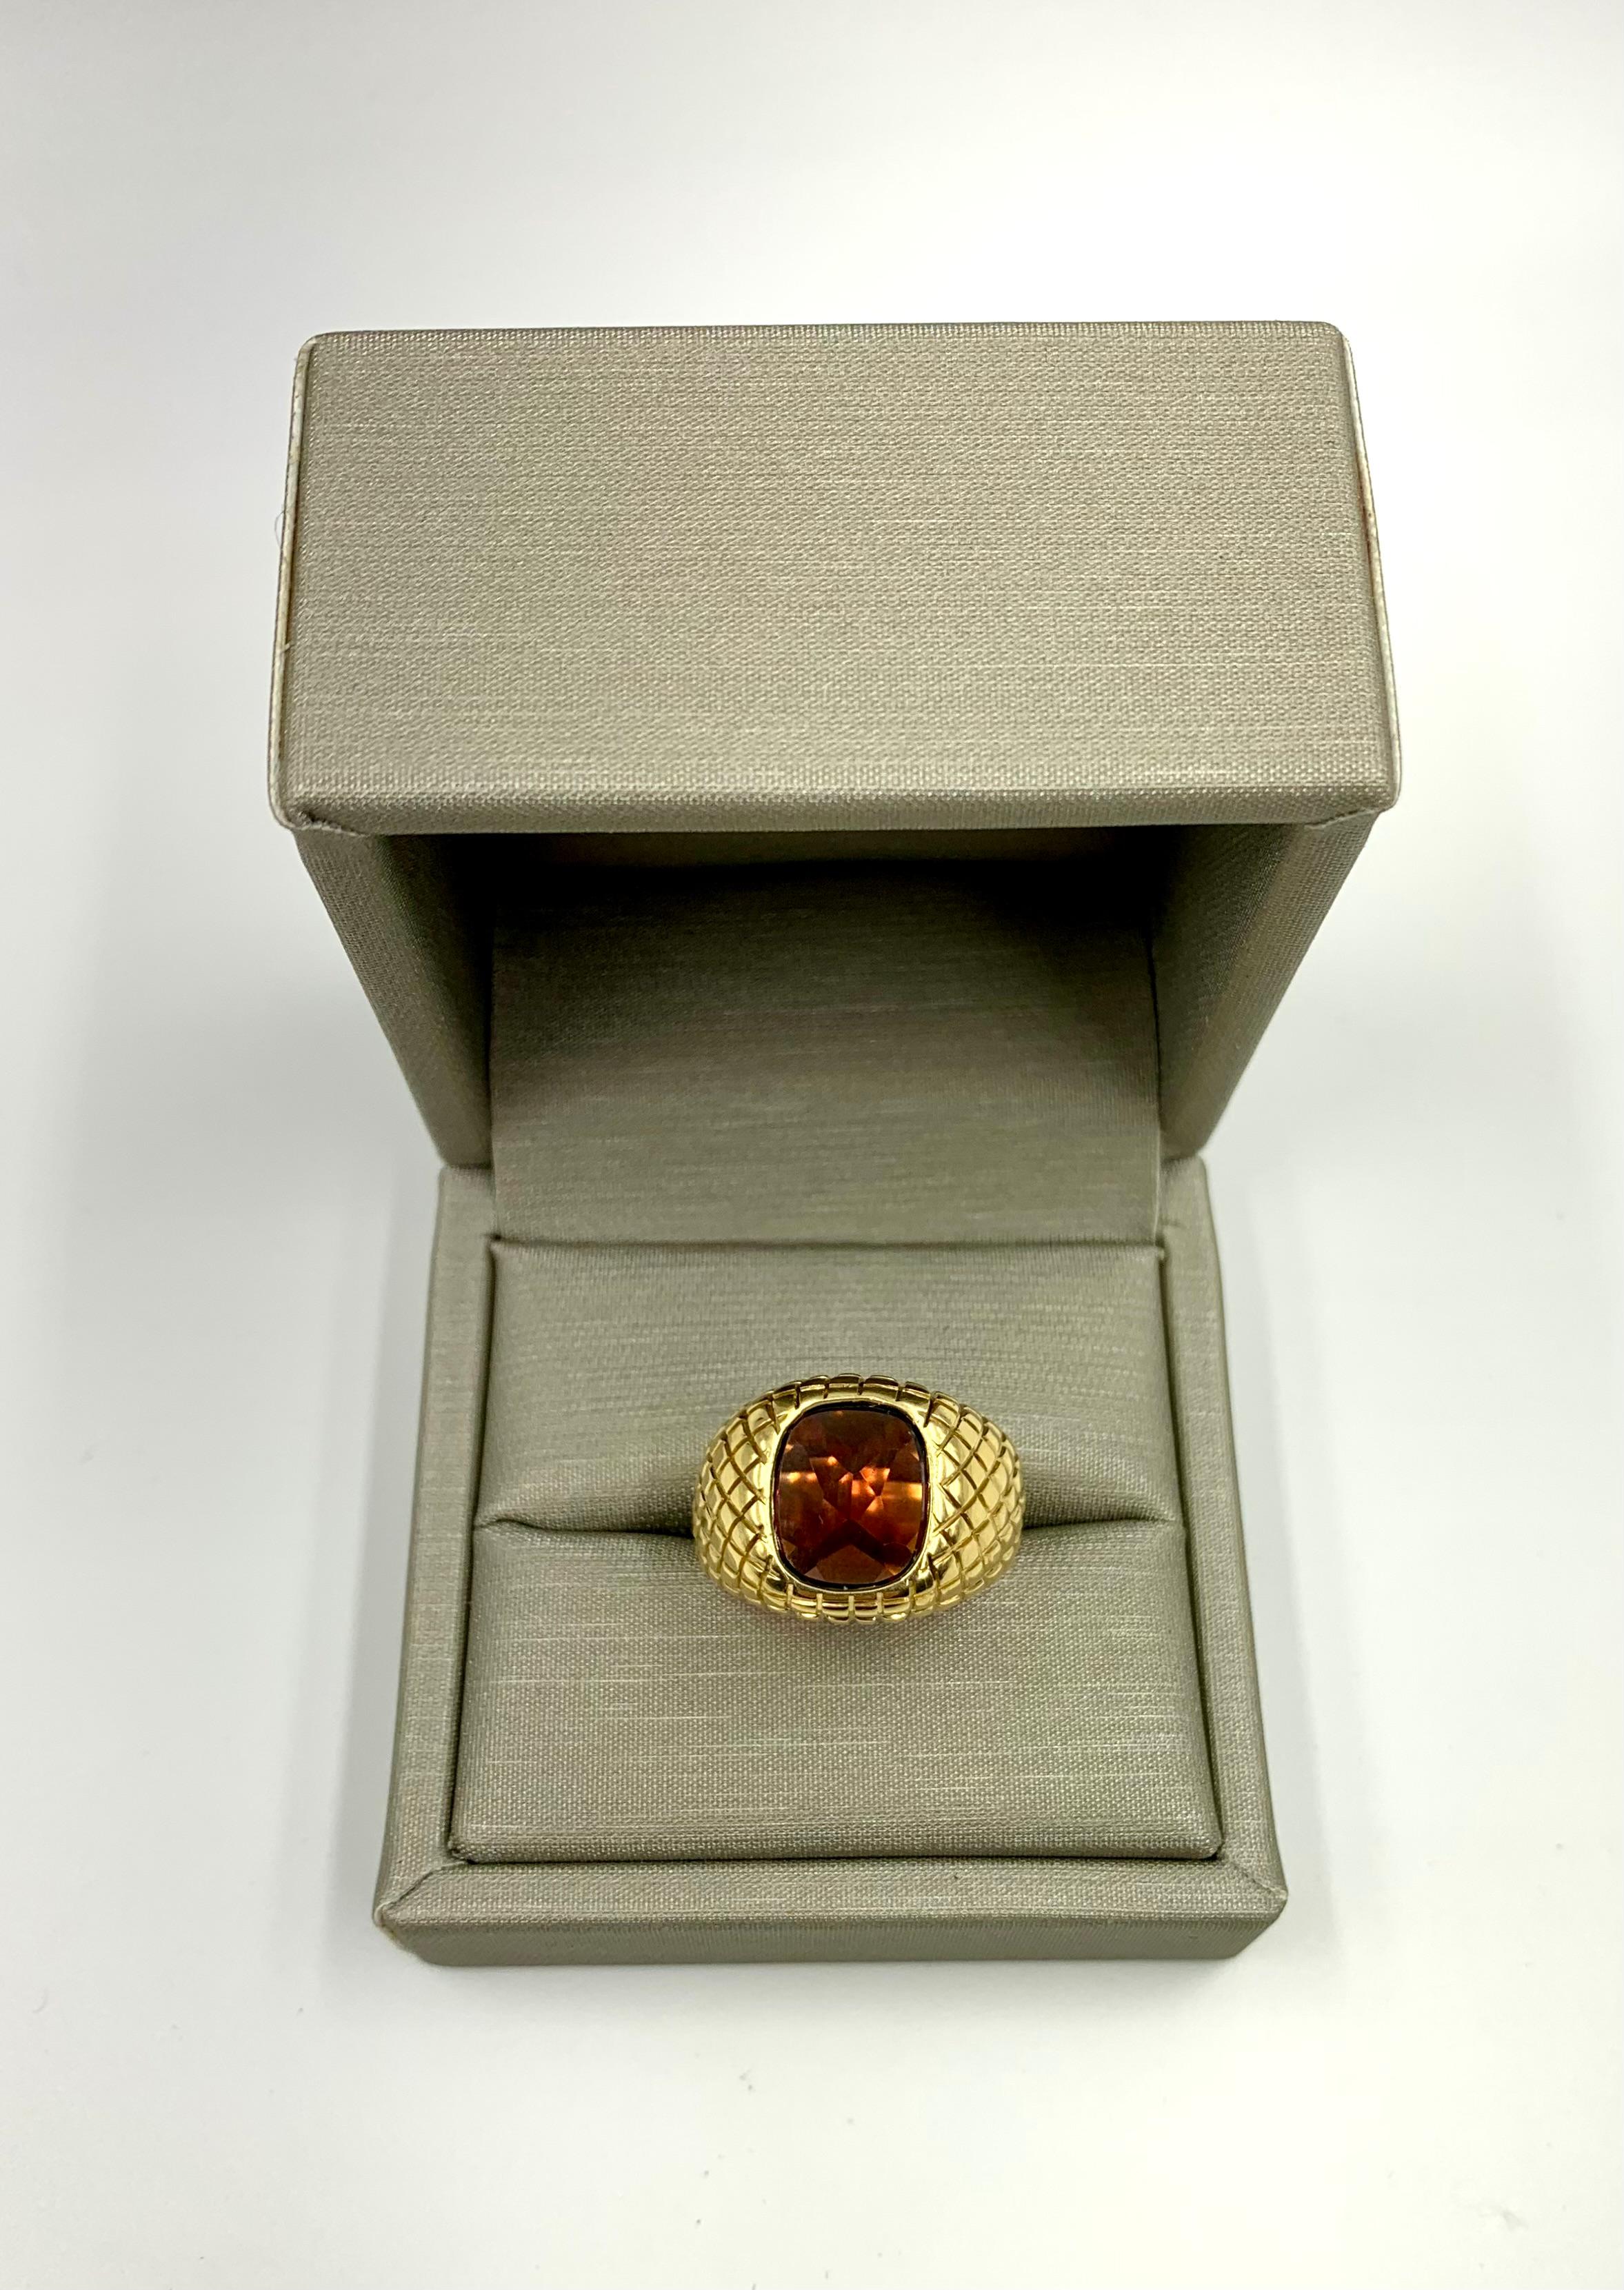 High quality 18K yellow gold rhombus box design garnet signet ring by ABL.
The fine oval Rhodolite garnet signet stone shows hidden fire as the pavillion of the gem is facet cut and the gold setting is open at the back to allow light to reflect,